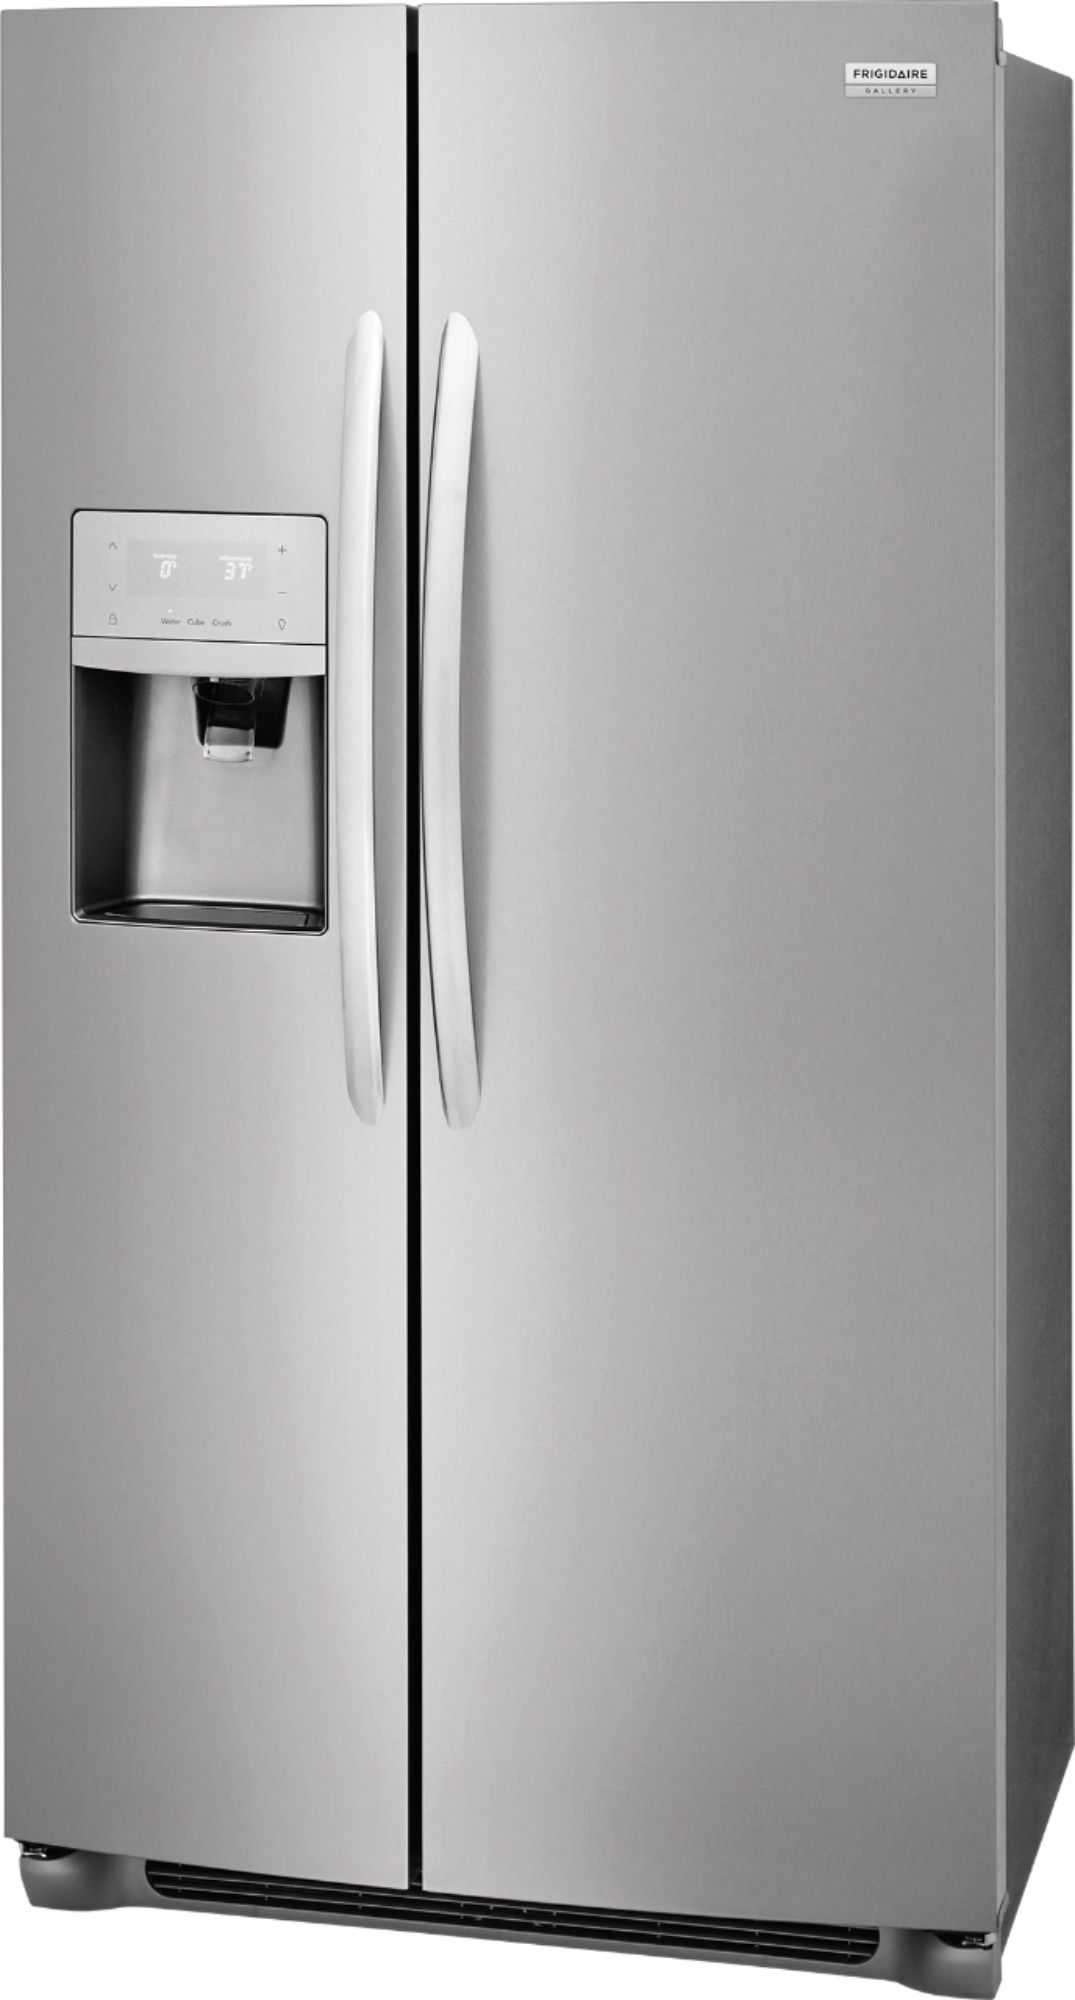 Angle View: Frigidaire - 22.2 Cu. Ft. Counter-Depth Side-by-Side Refrigerator - Stainless steel